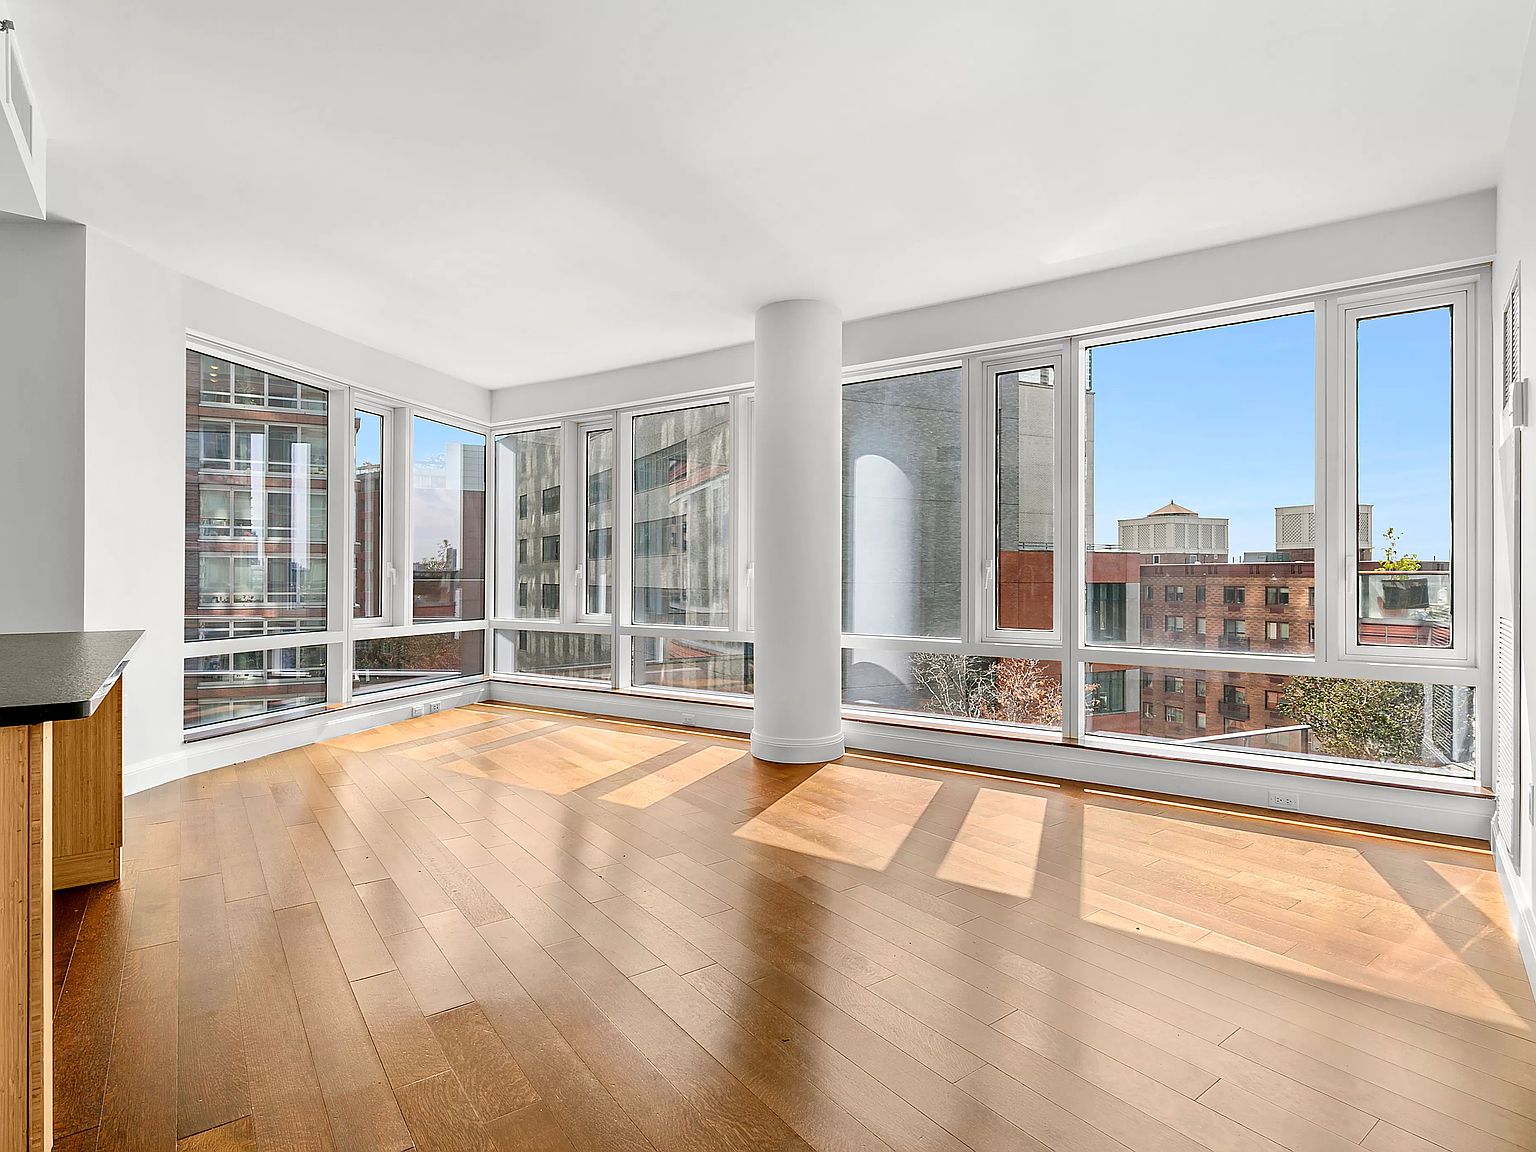 70 Little West St APT 8L, New York, NY 10004 | Zillow